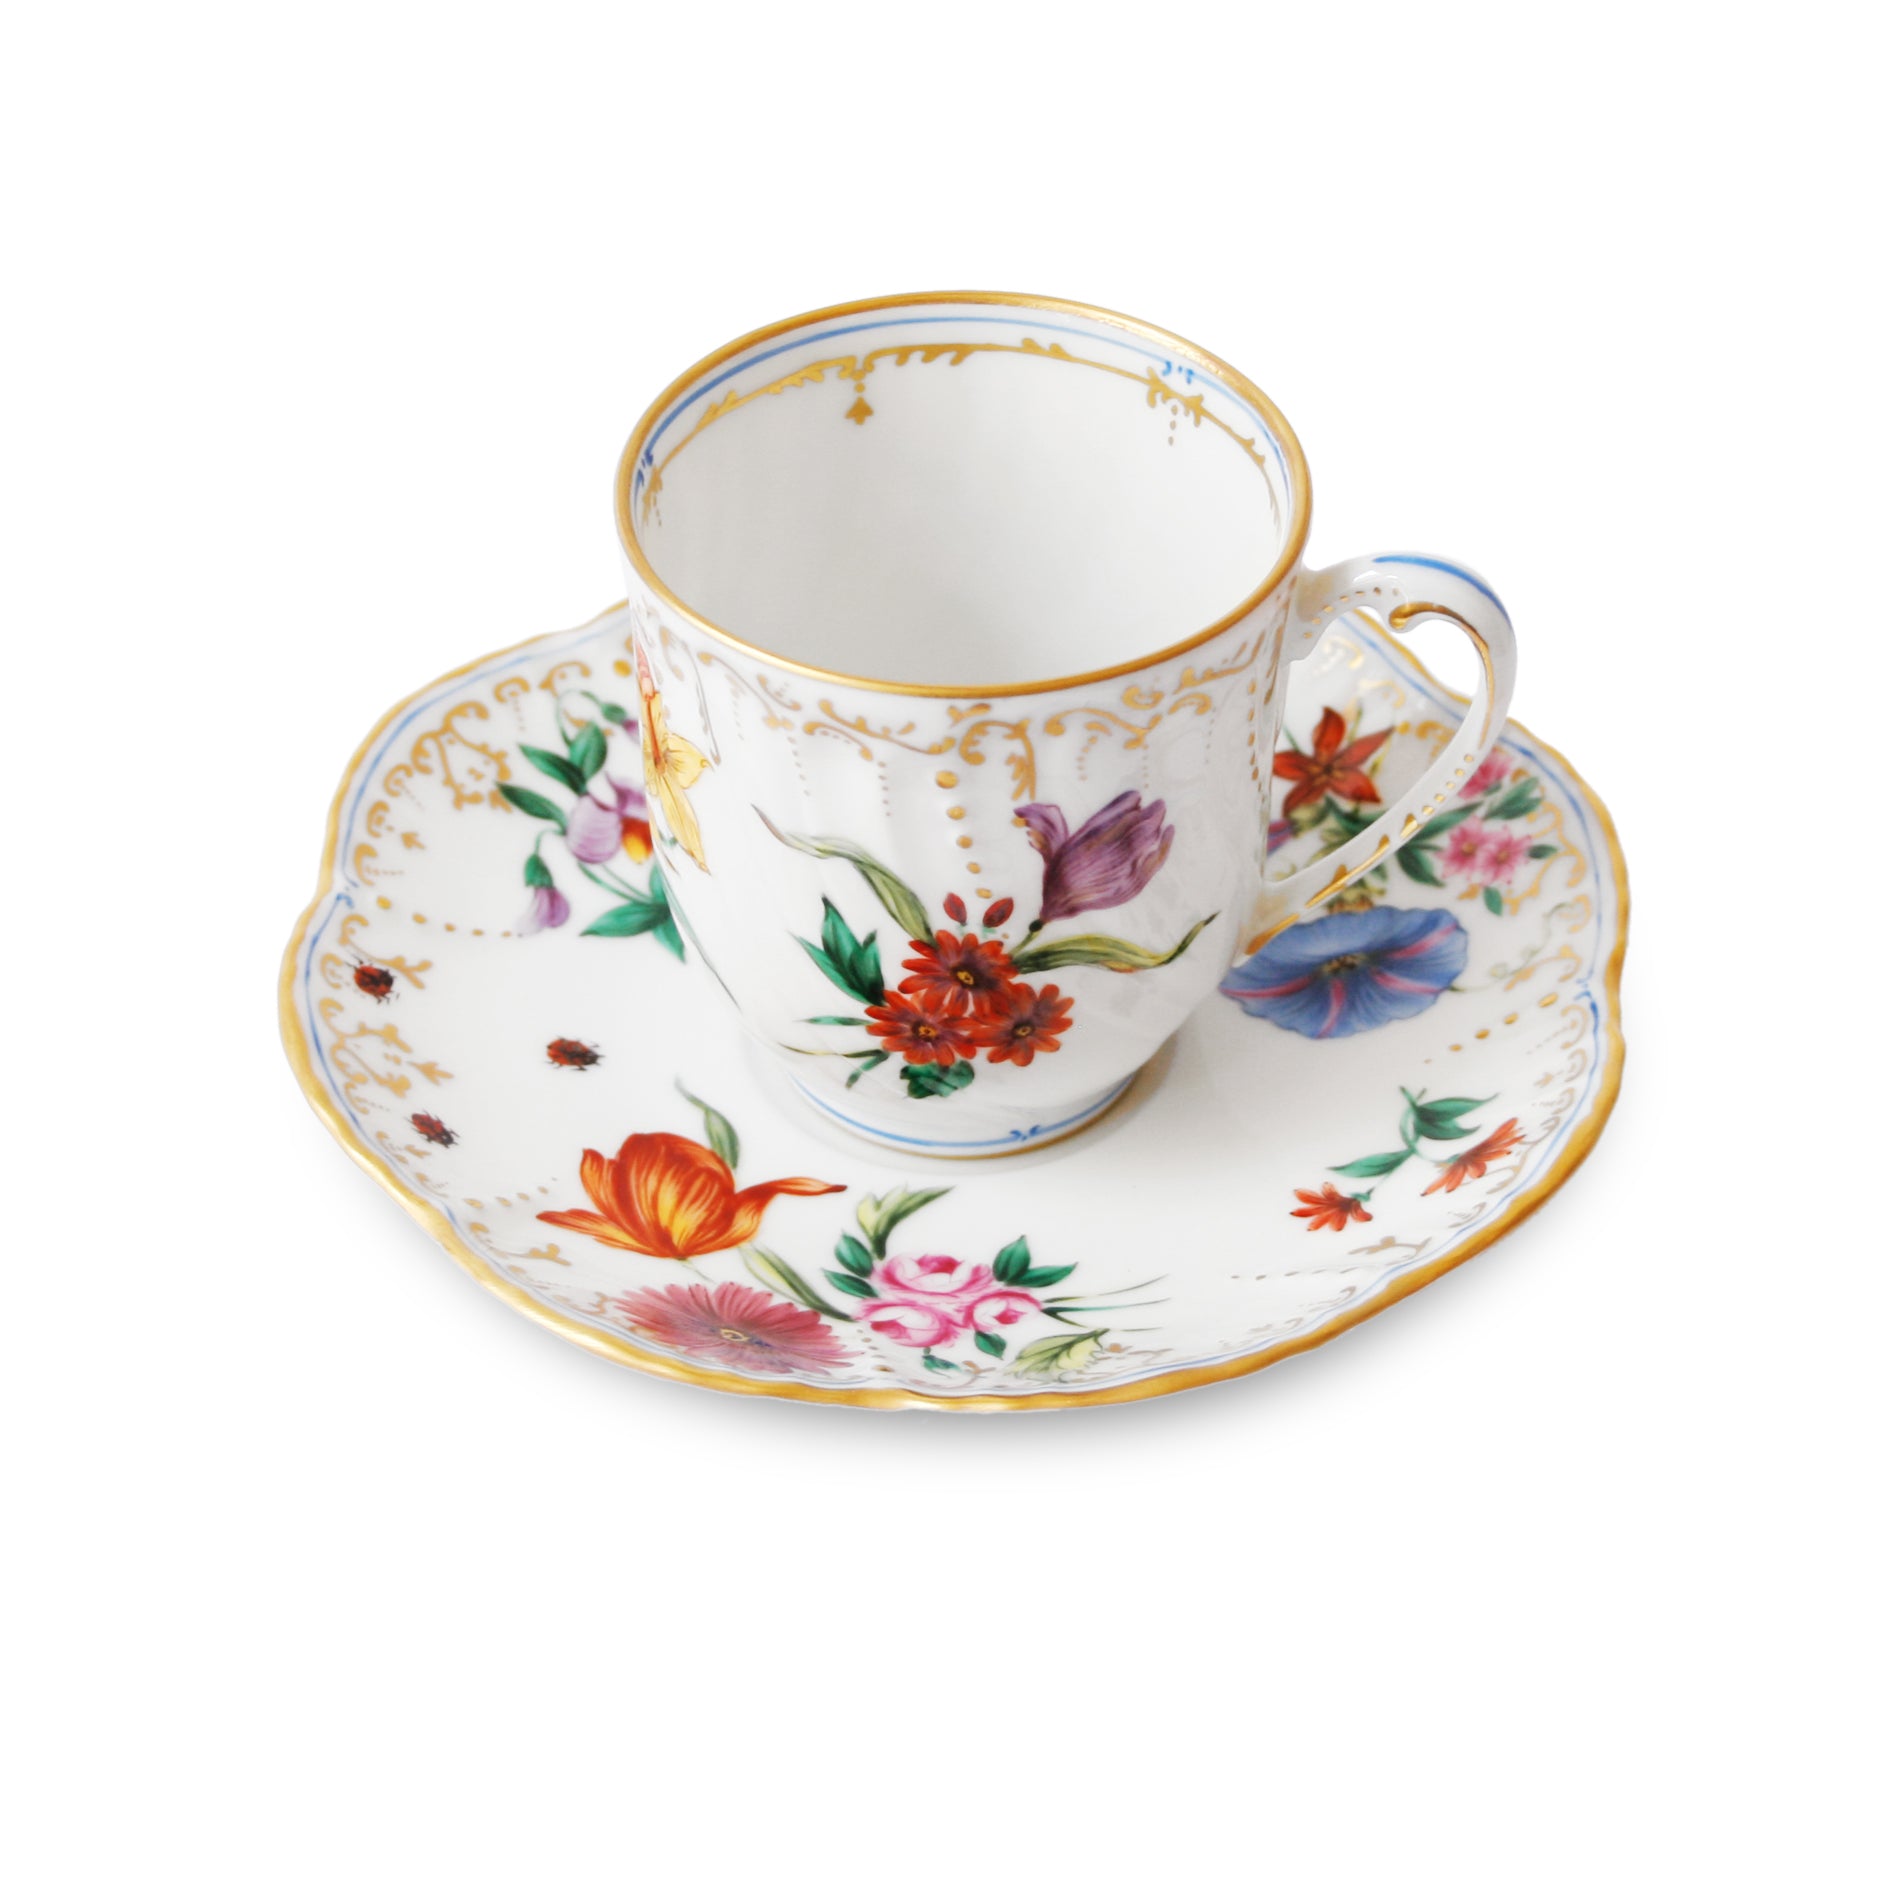 Belles Saisons - Coffee cup and saucer
